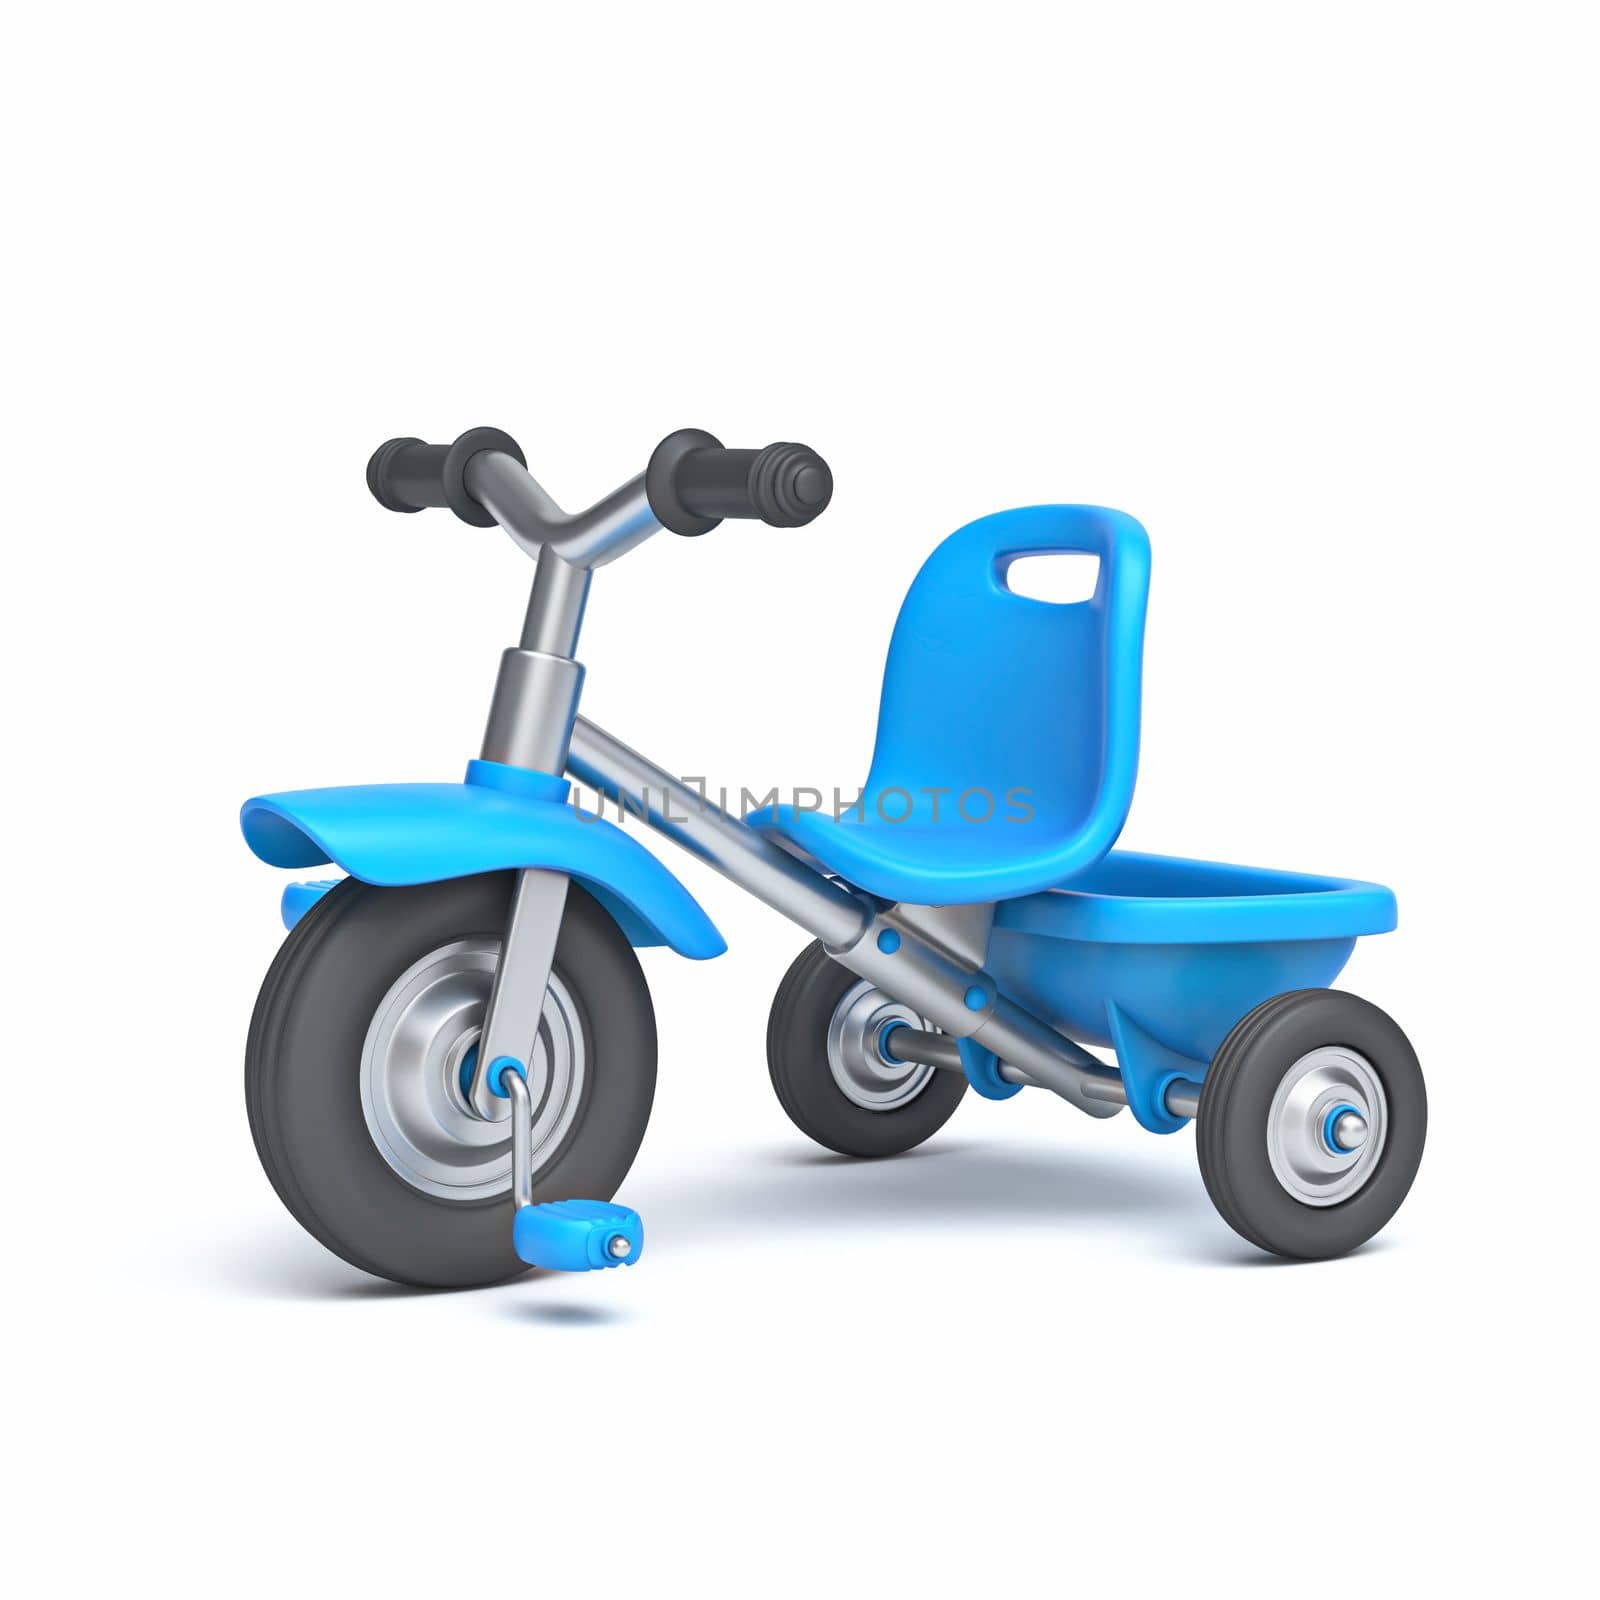 Kid tricycle 3D rendering illustration isolated on white background